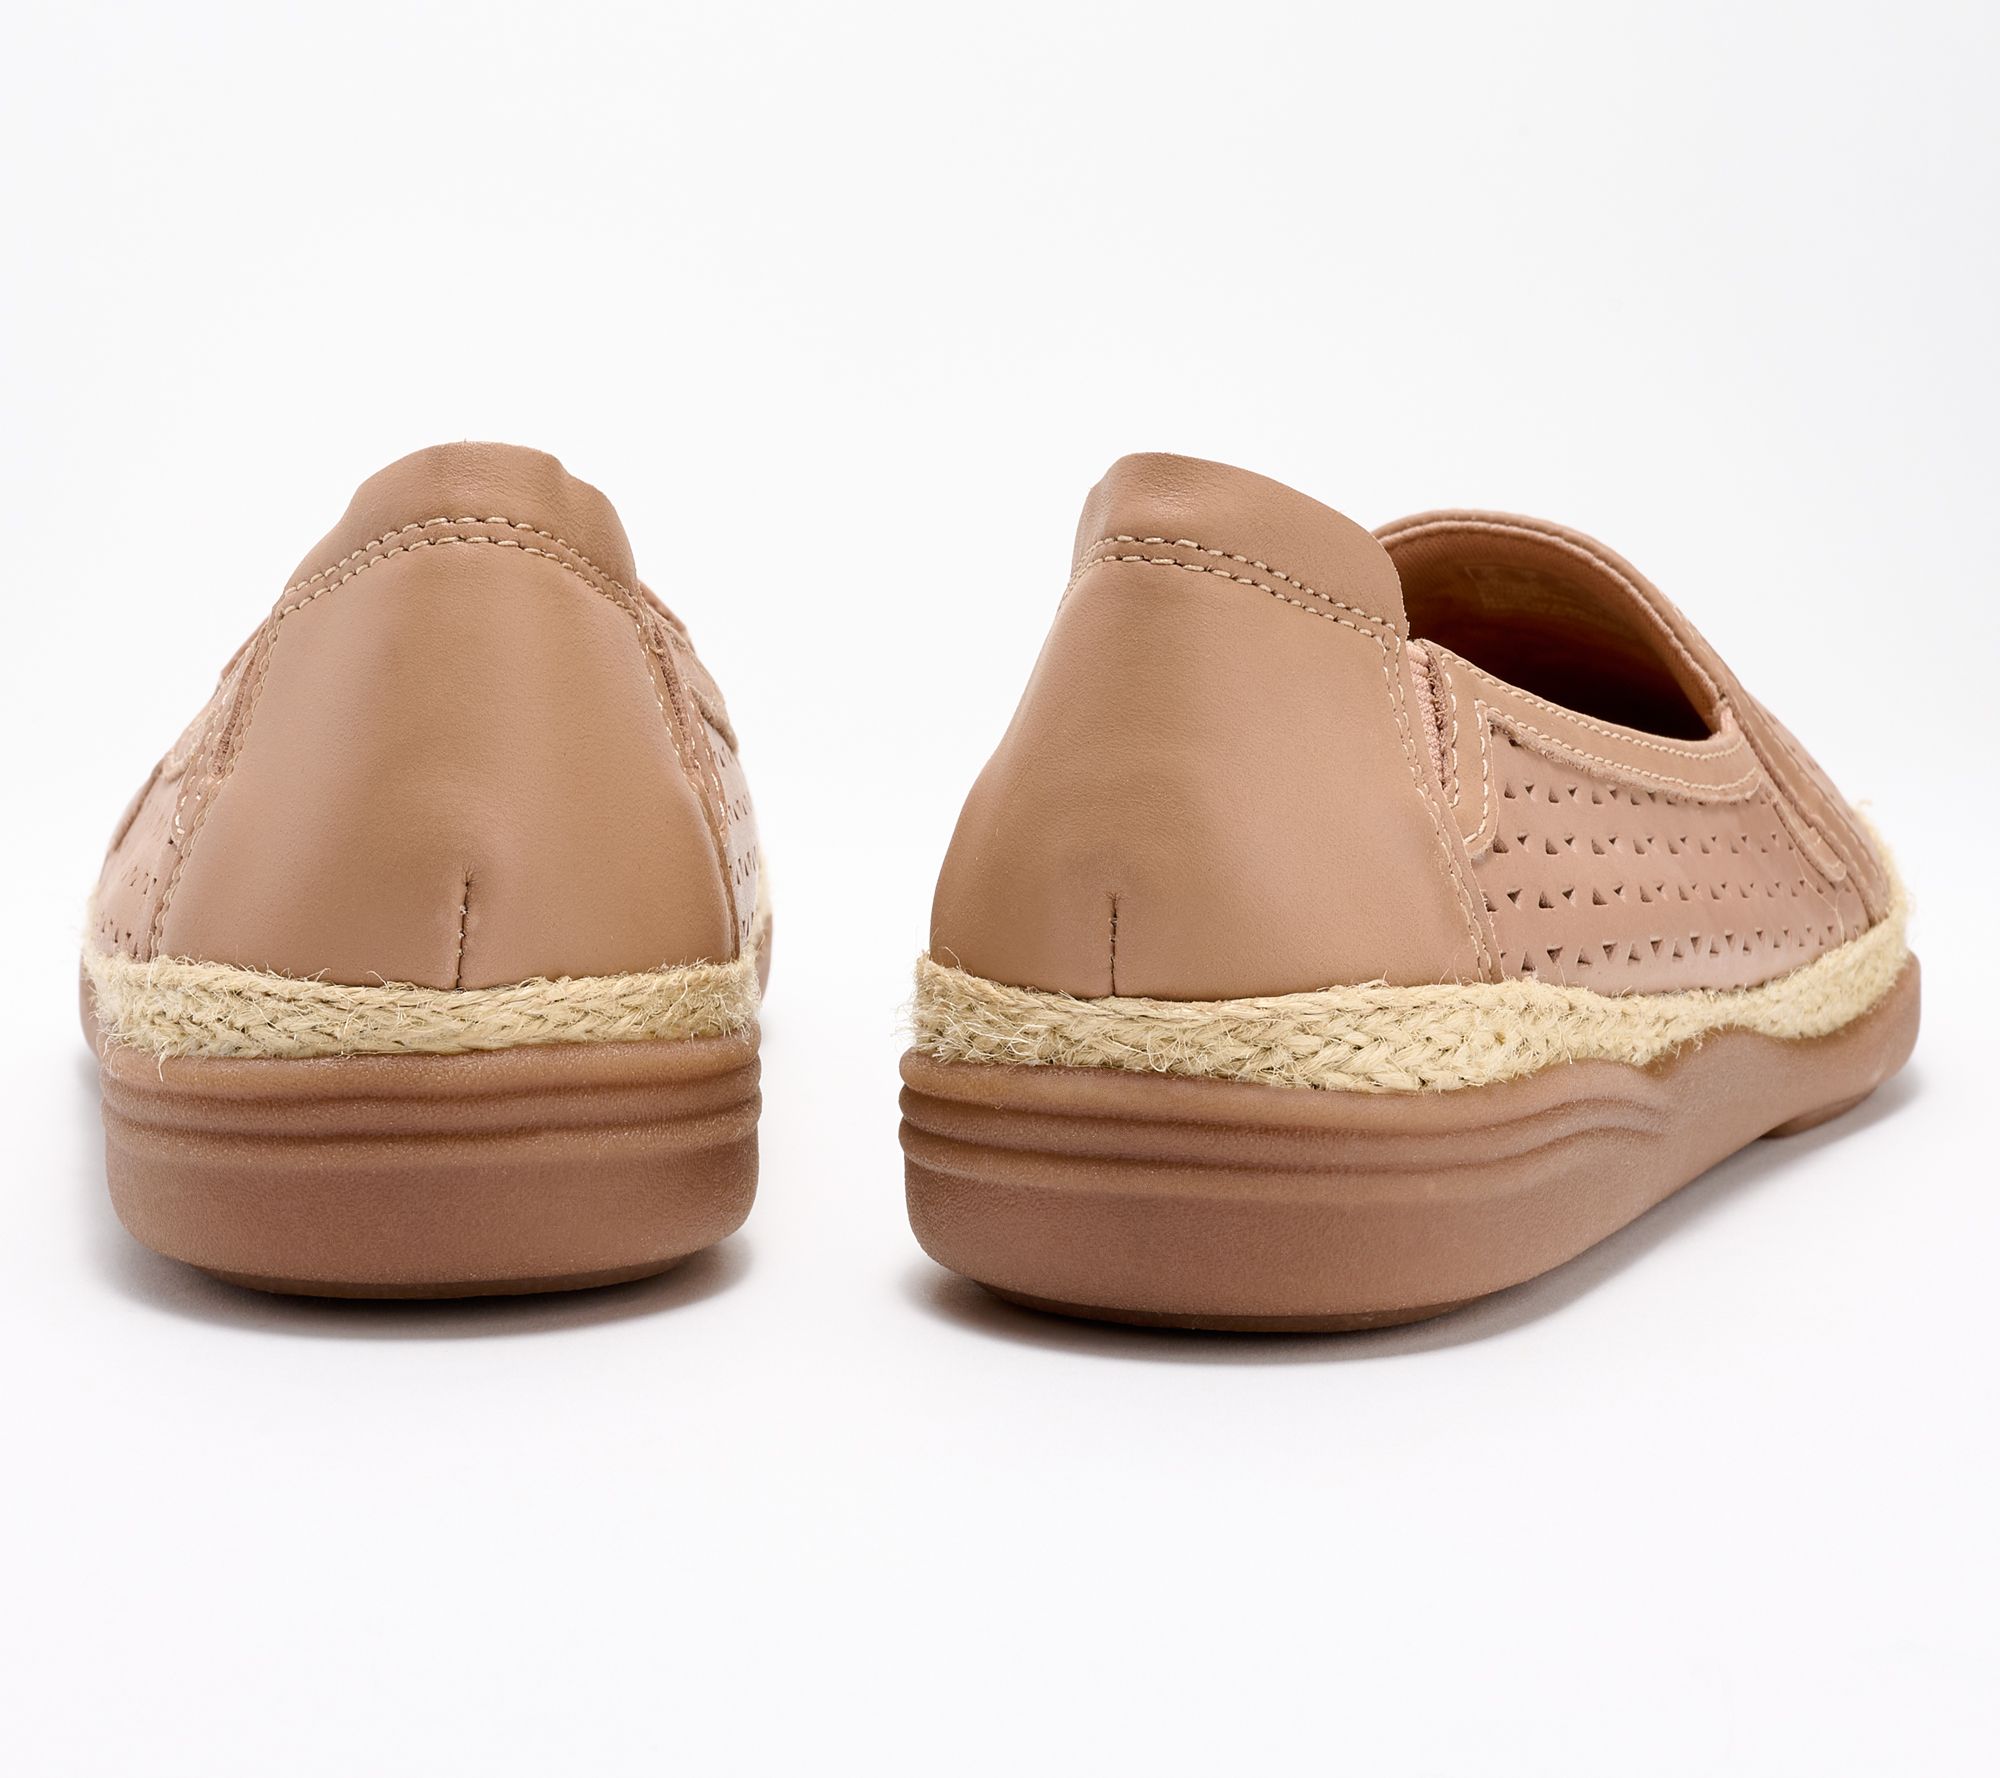 Clarks Collection Espadrille Slip-Ons - Elaina Ruby - QVC.com